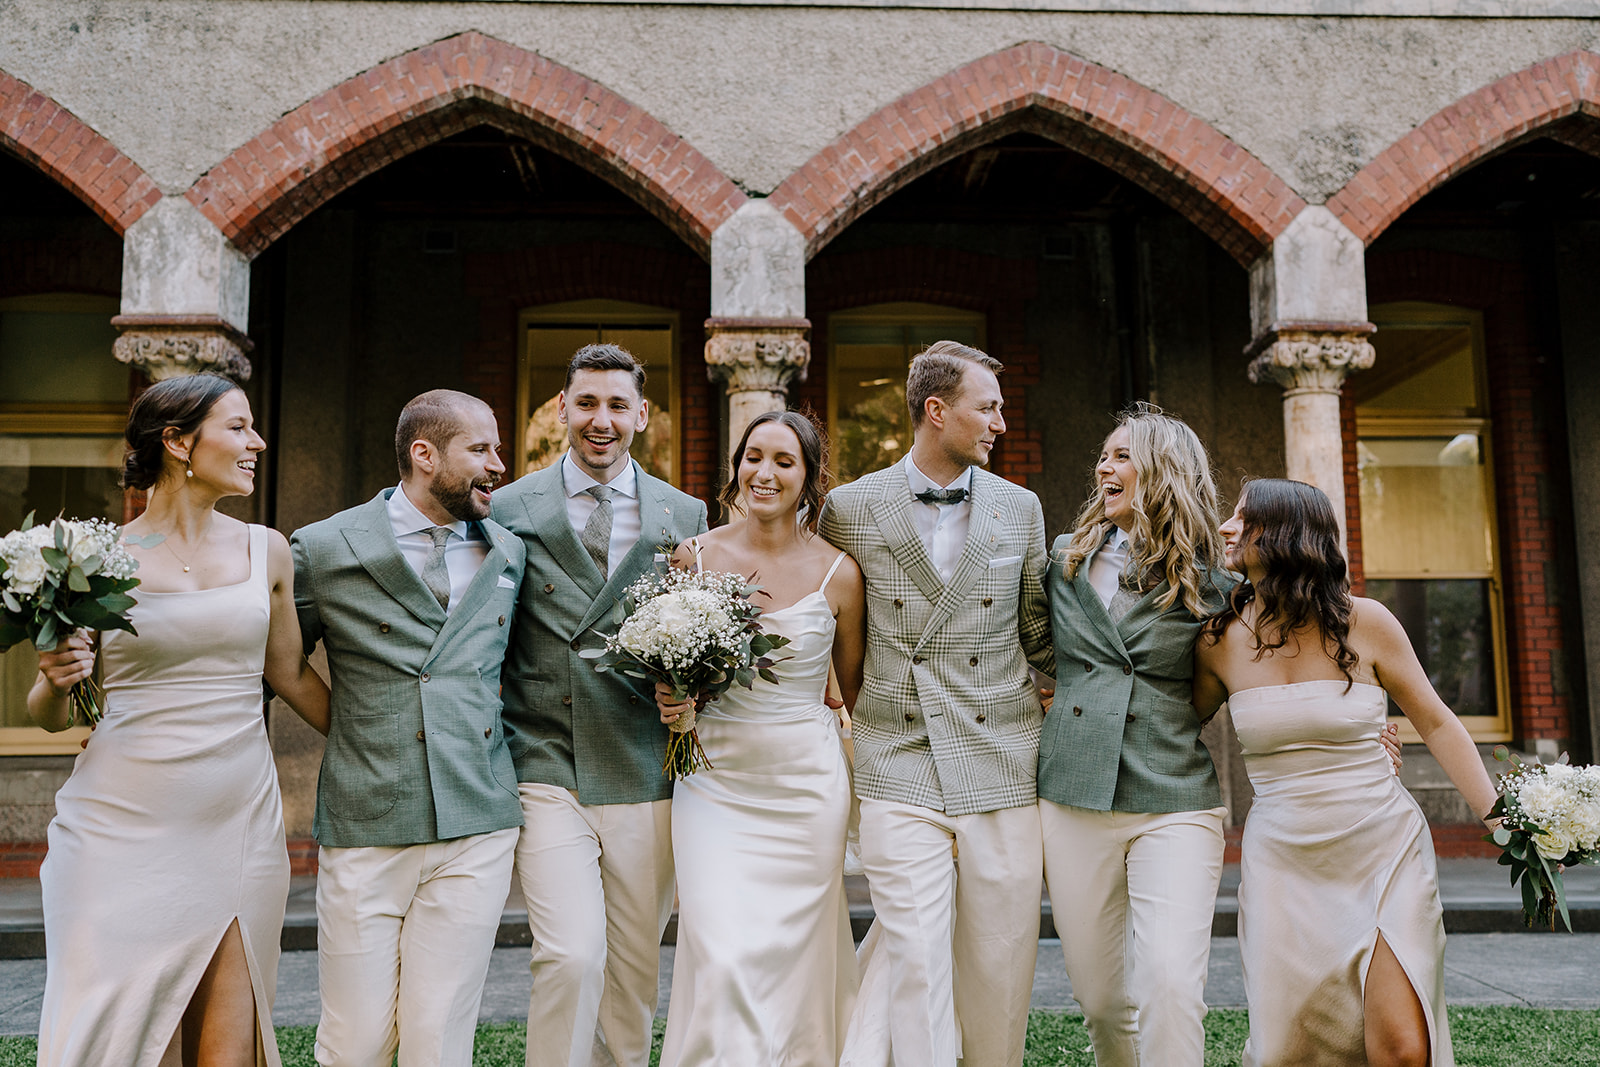 Bridal party having a laugh during the portrait session at Abbotsford Convent